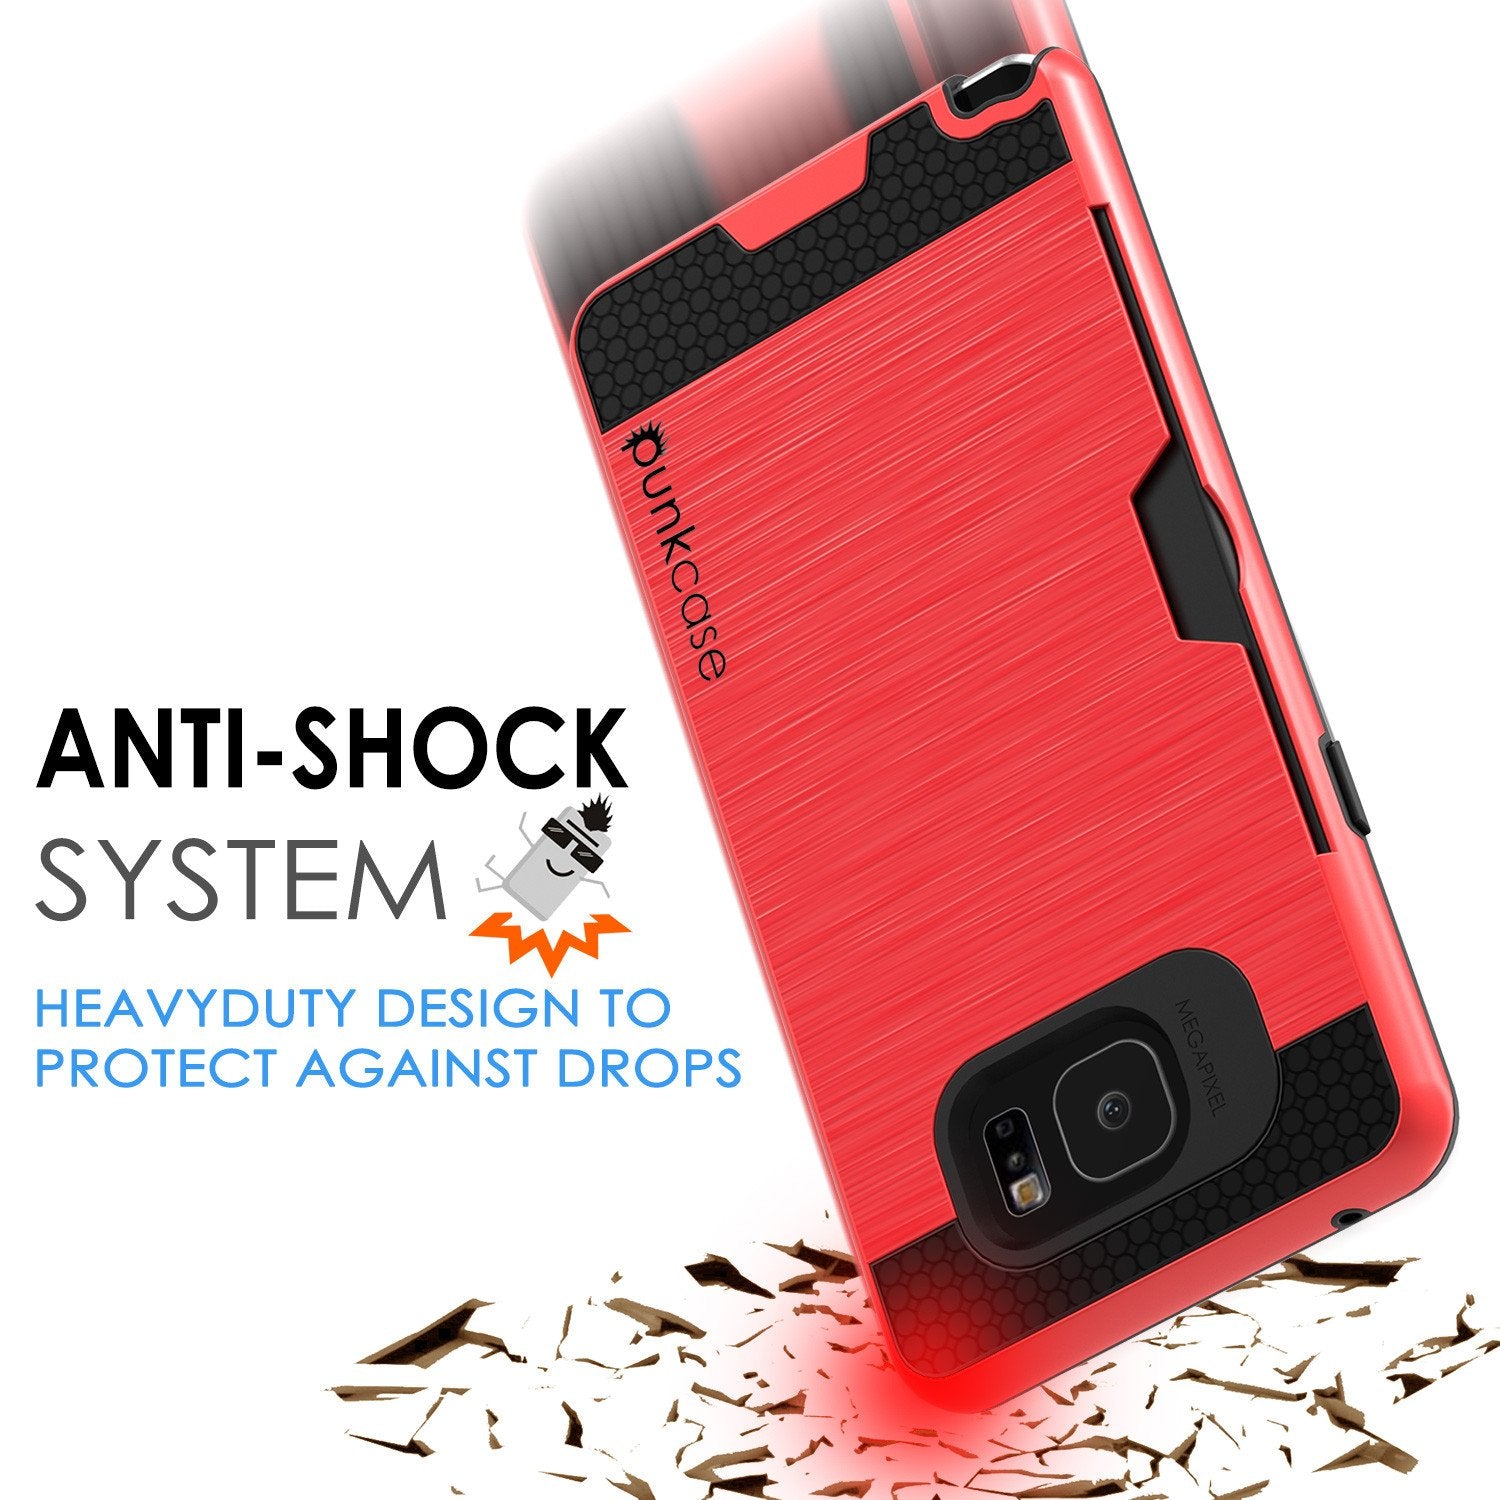 Galaxy Note 5 Case PunkCase SLOT Red Series Slim Armor Soft Cover Case w/ Tempered Glass - PunkCase NZ